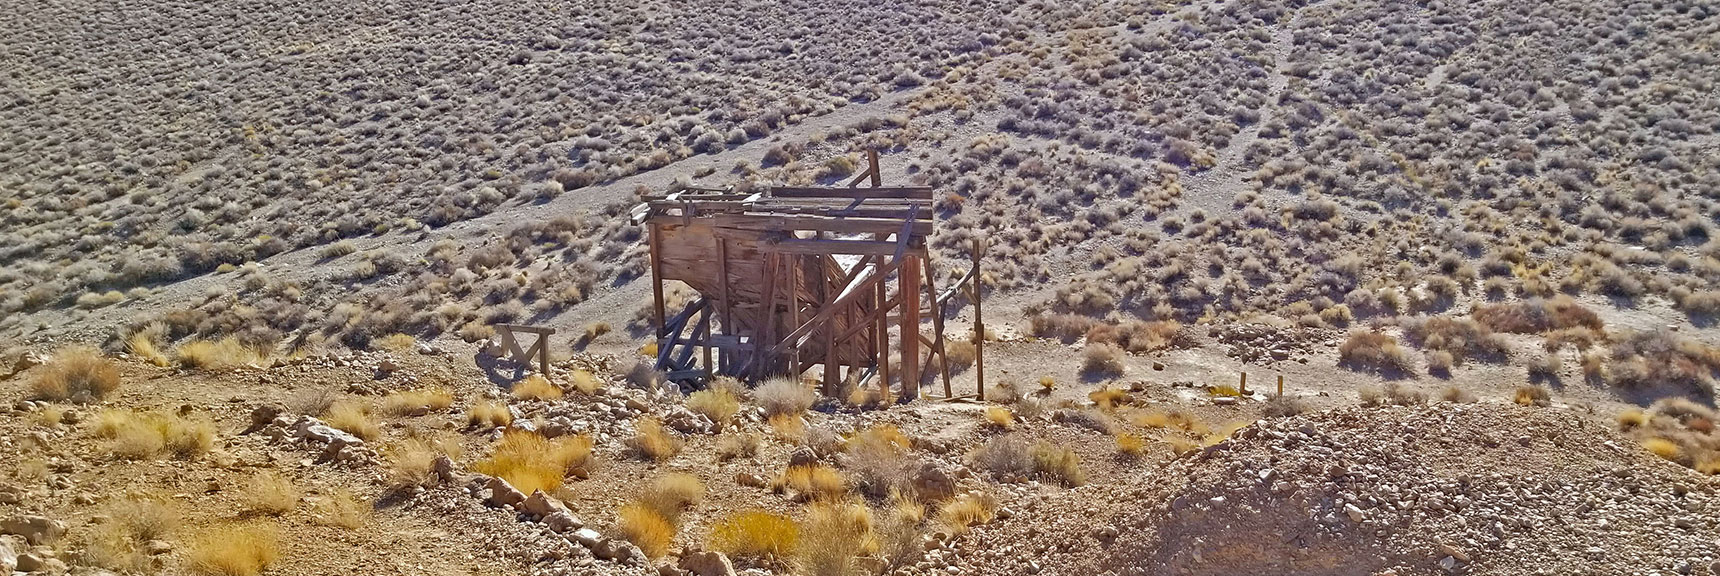 Top View of Eureka Mine. 2-91 Tons of Gold Ore = 1 Ounce of Gold | Eureka Mine, Harrisburg, Cashier Mill, Death Valley, California